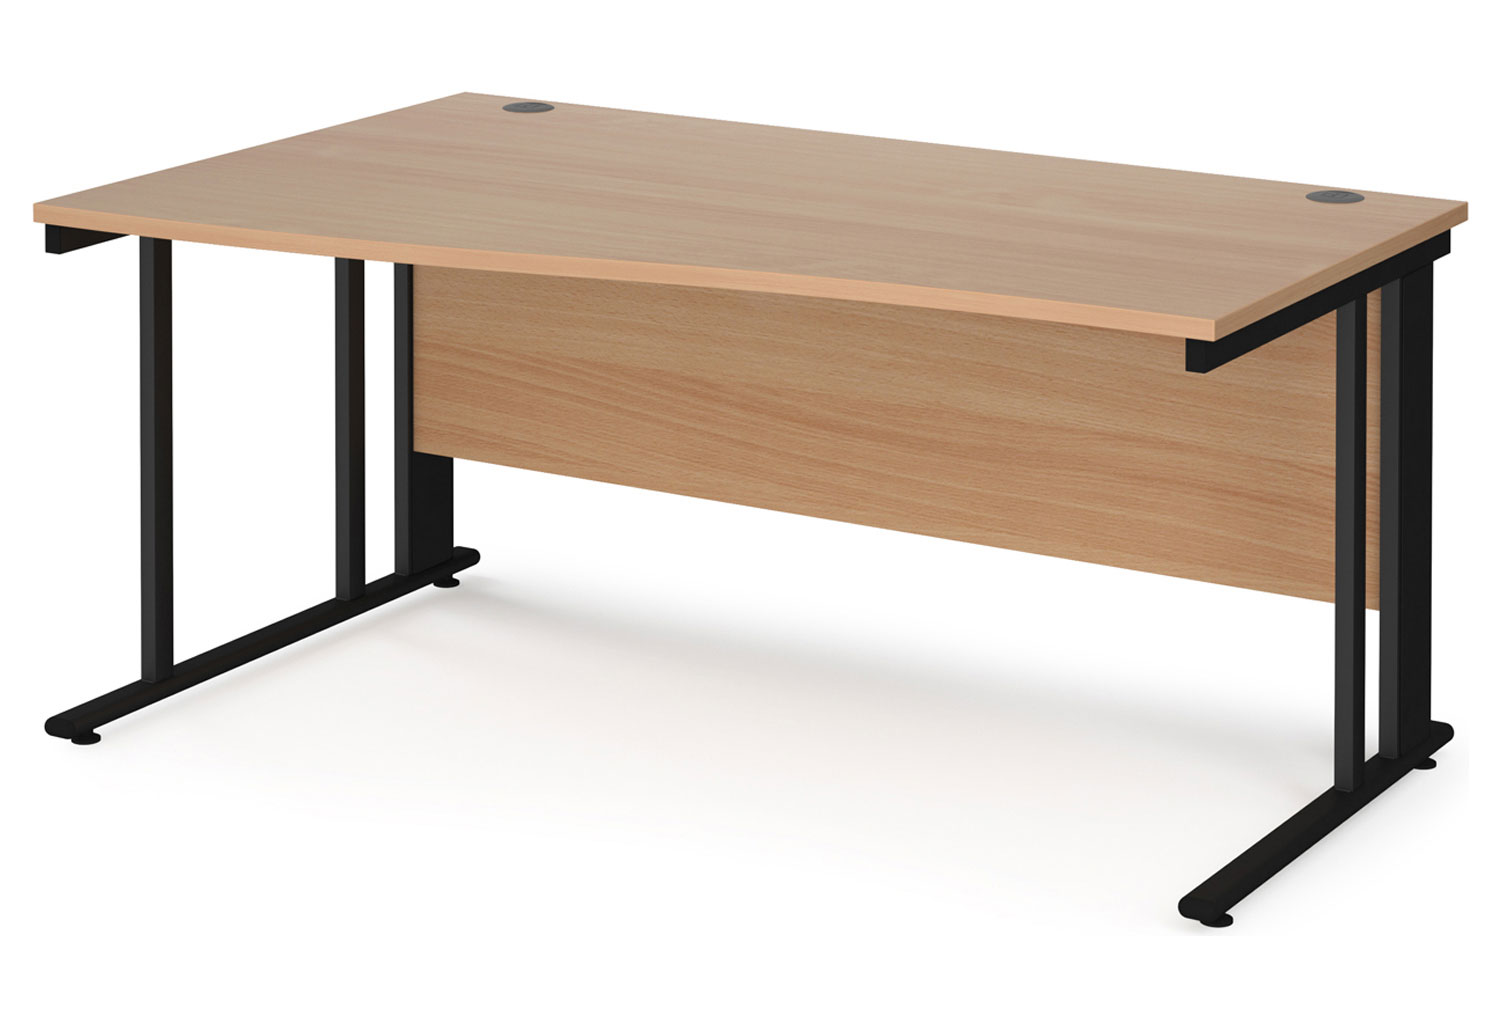 Value Line Deluxe Cable Managed Left Hand Wave Office Desk (Black Legs), 160wx80dx73h (cm), Beech, Express Delivery